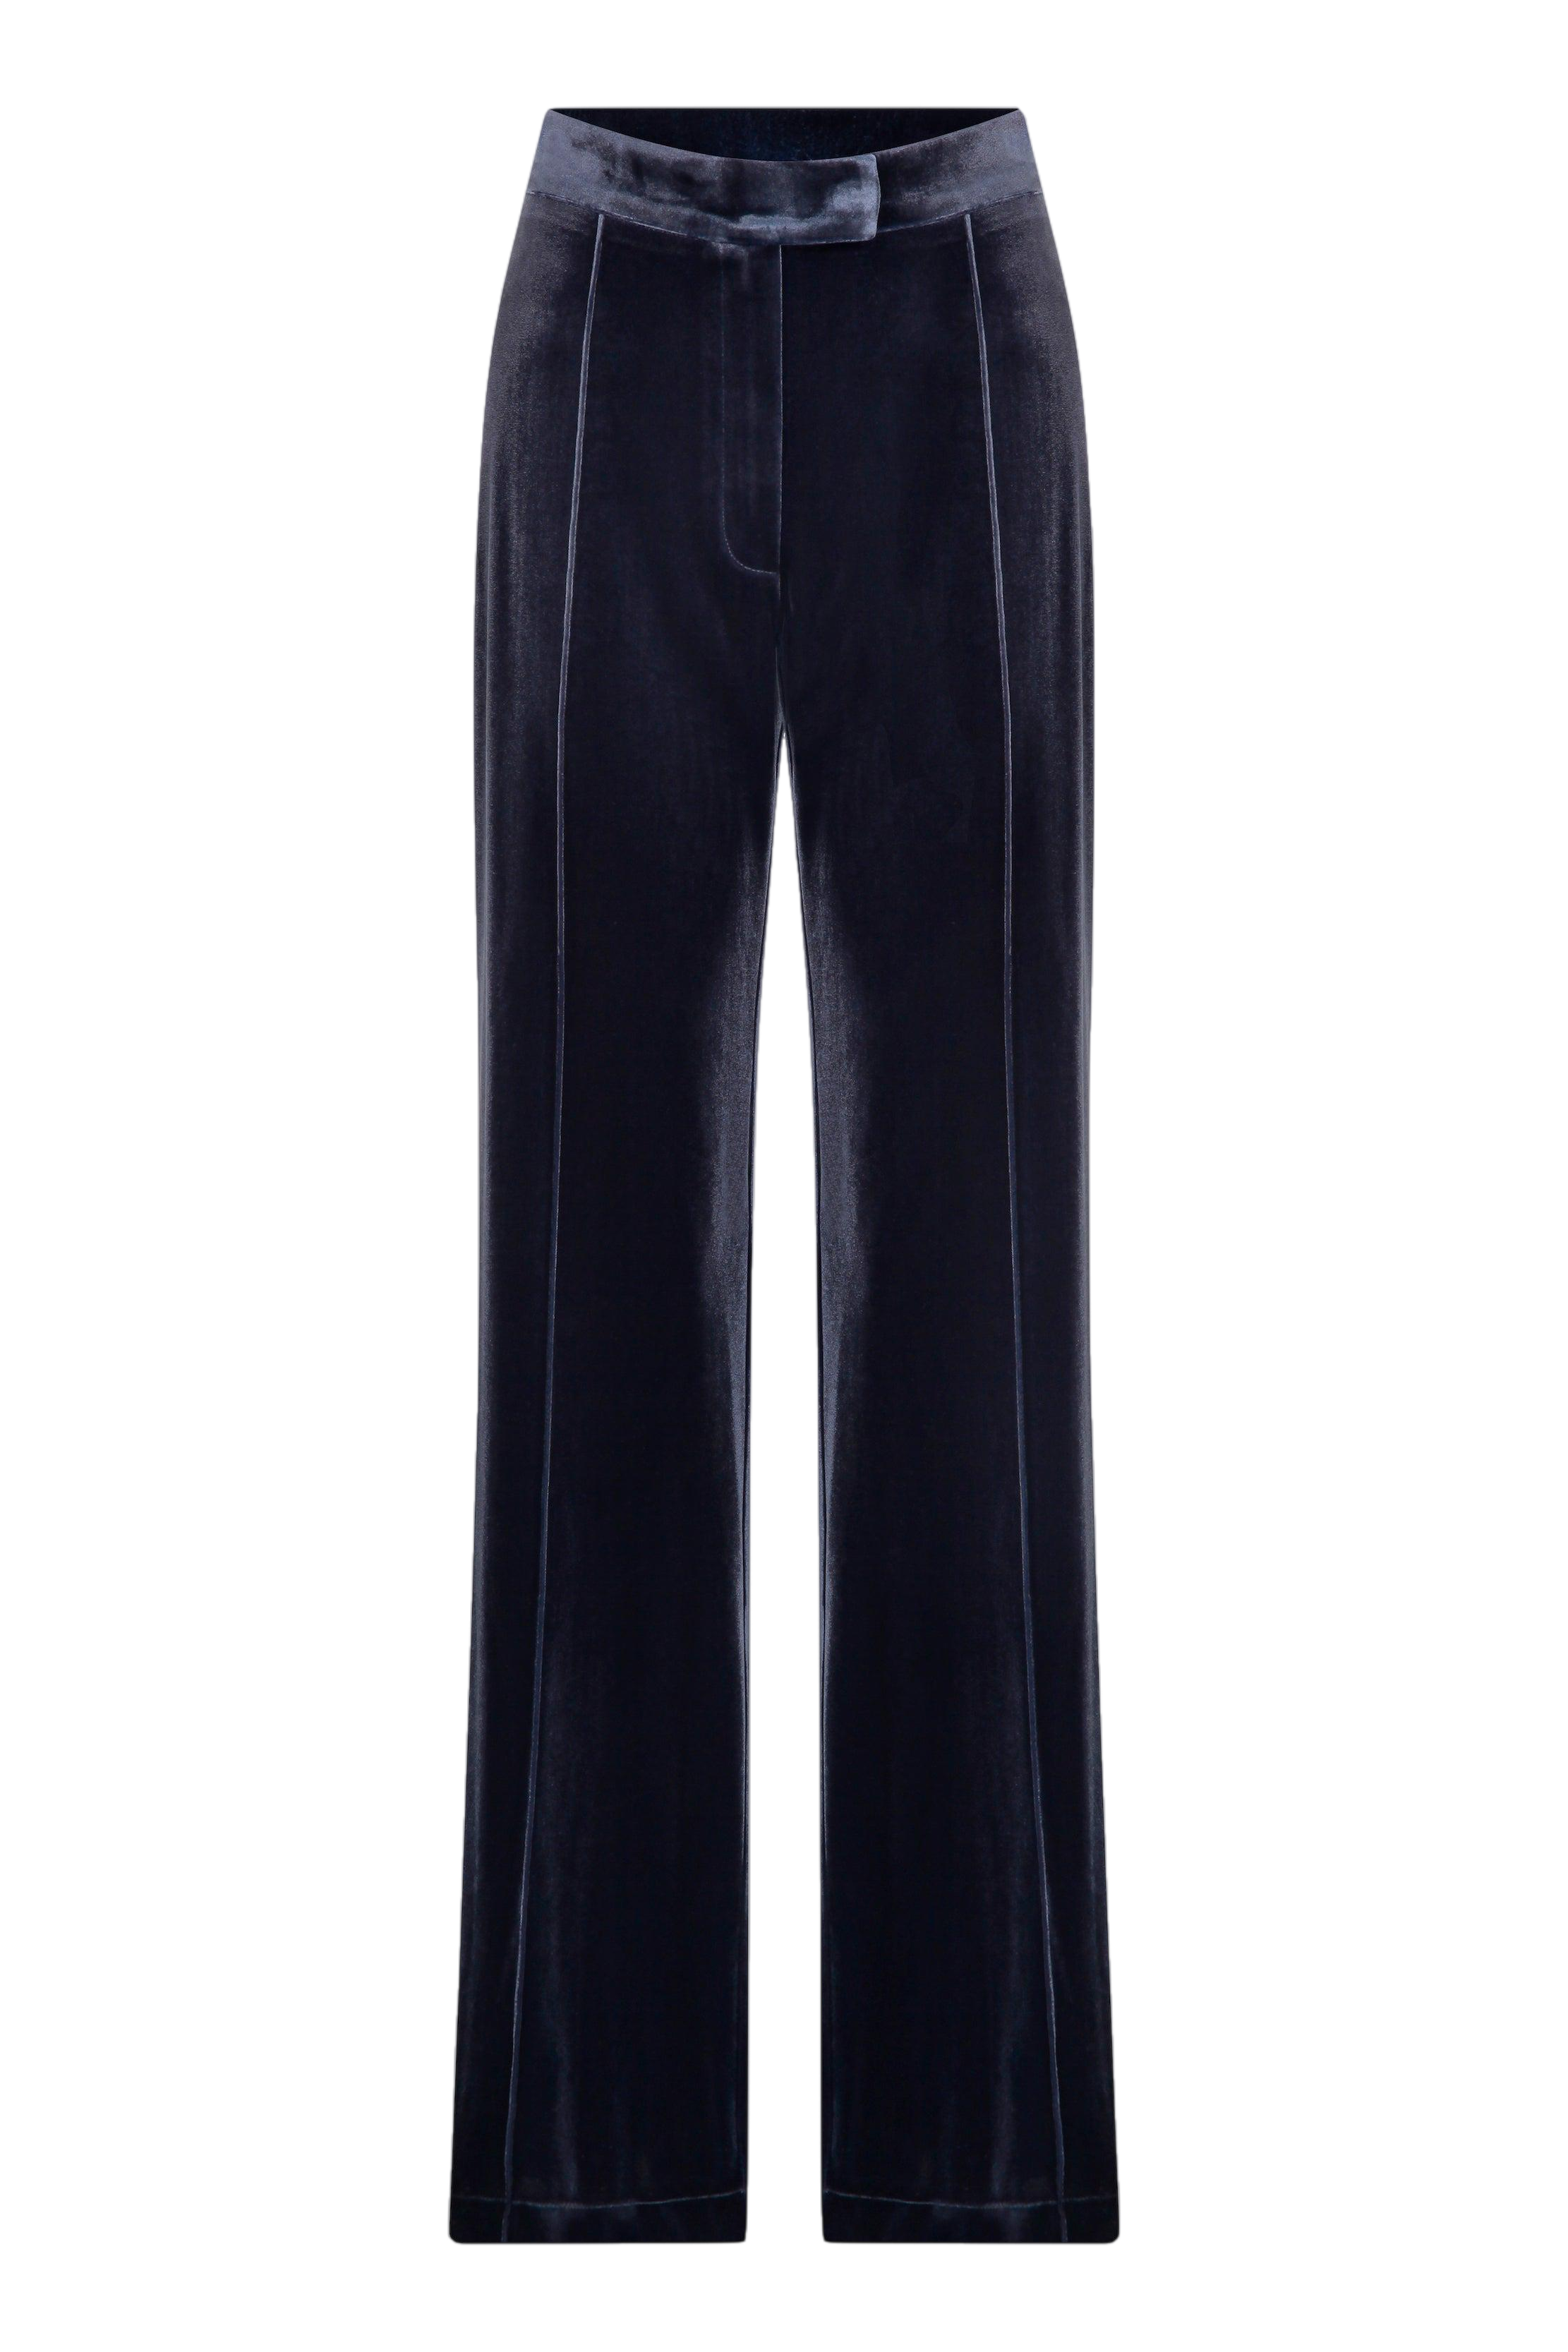 LuvForever Navy Double Breasted 2-Piece Velvet Trousers Suit Size(6-14) |  eBay